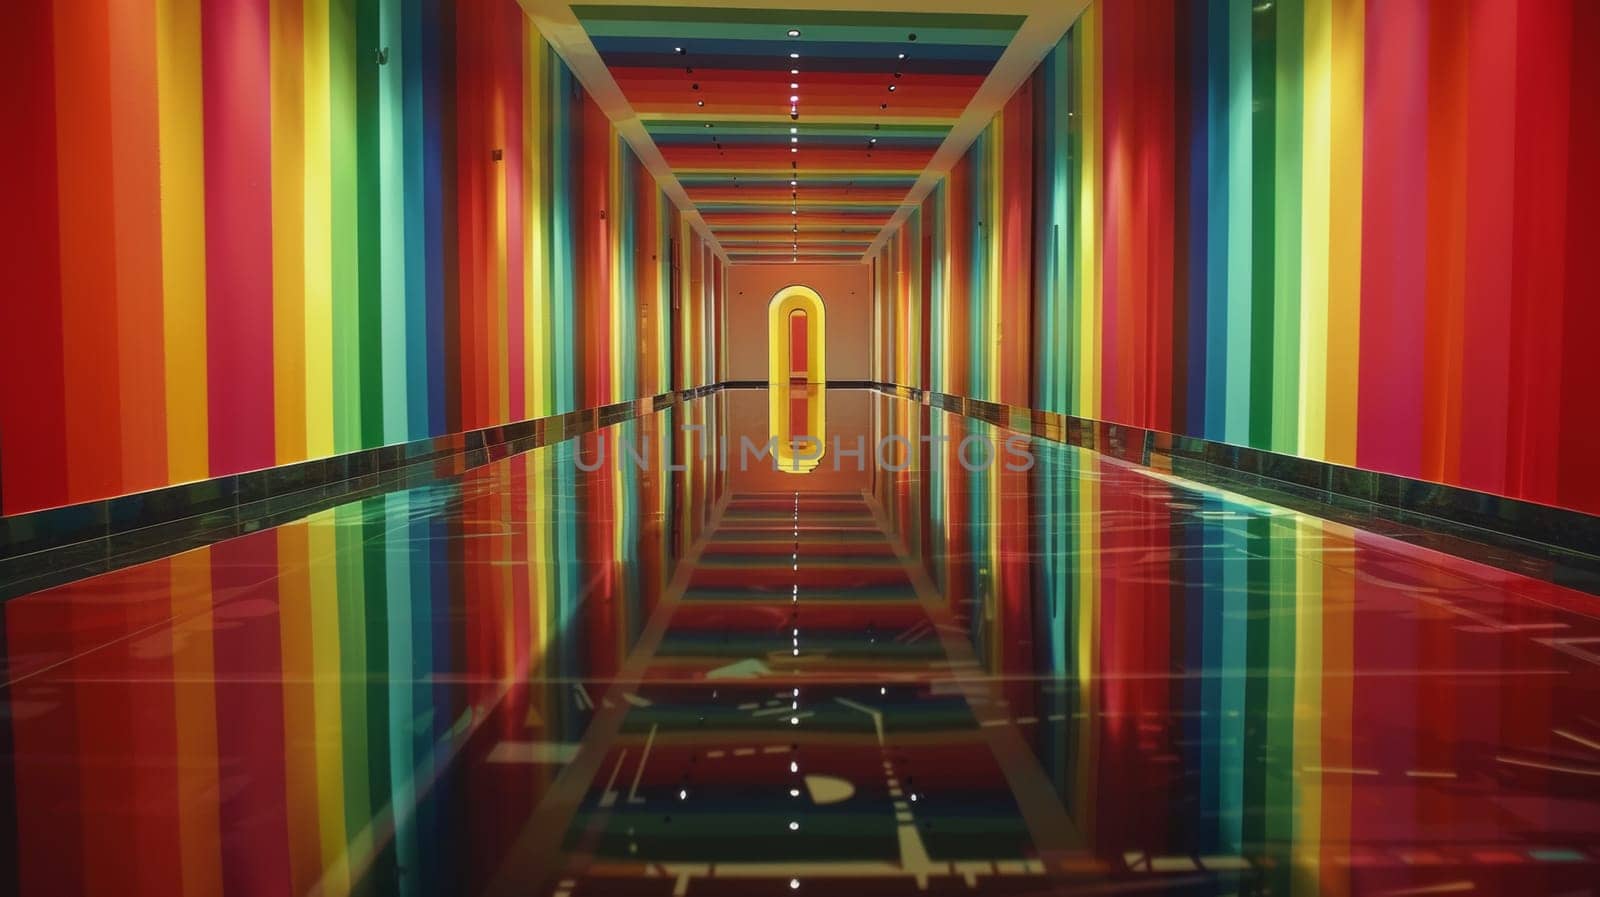 A long hallway with a mirror on the wall and rainbow stripes